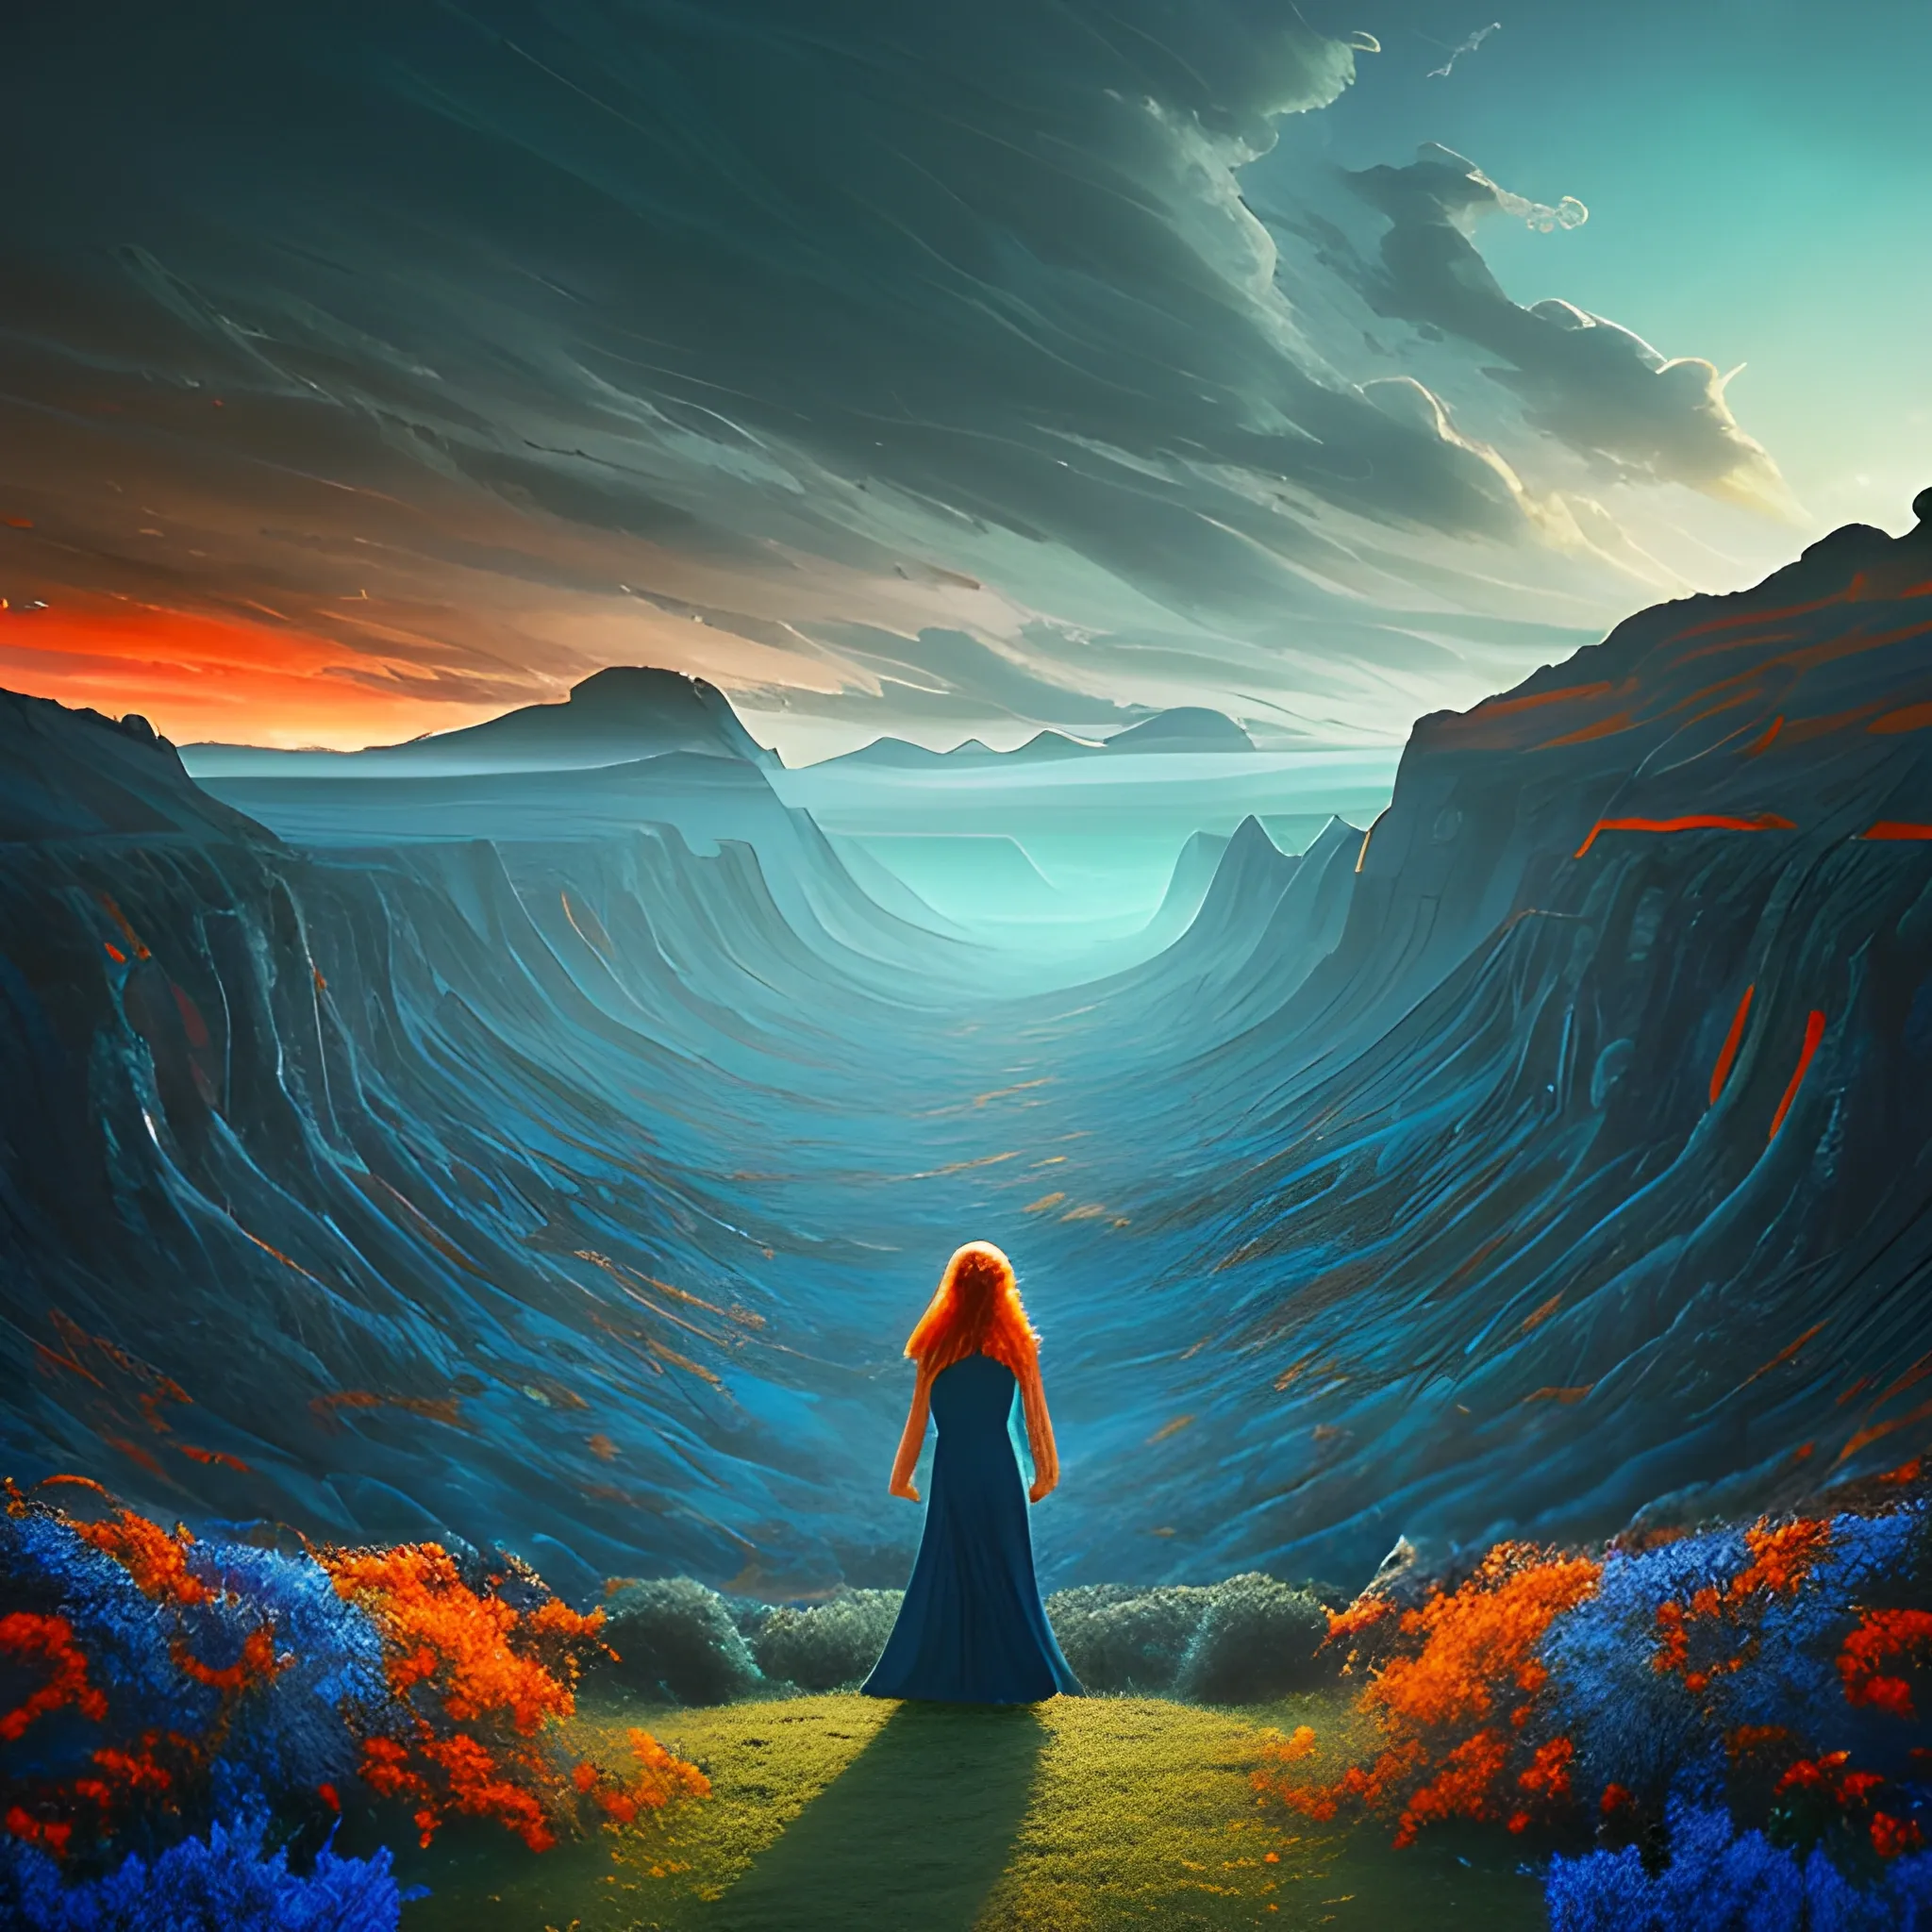 a beautiful landscape photo inspired by arcadia, cinematic atmospheric masterpiece, award winning, hyperdetailed, fantastic, wonderful with a mid-aged modern looking woman with mid-long hair looking at this scenary knowing she is happy after that life has made her strong, with blue and orange tones.

